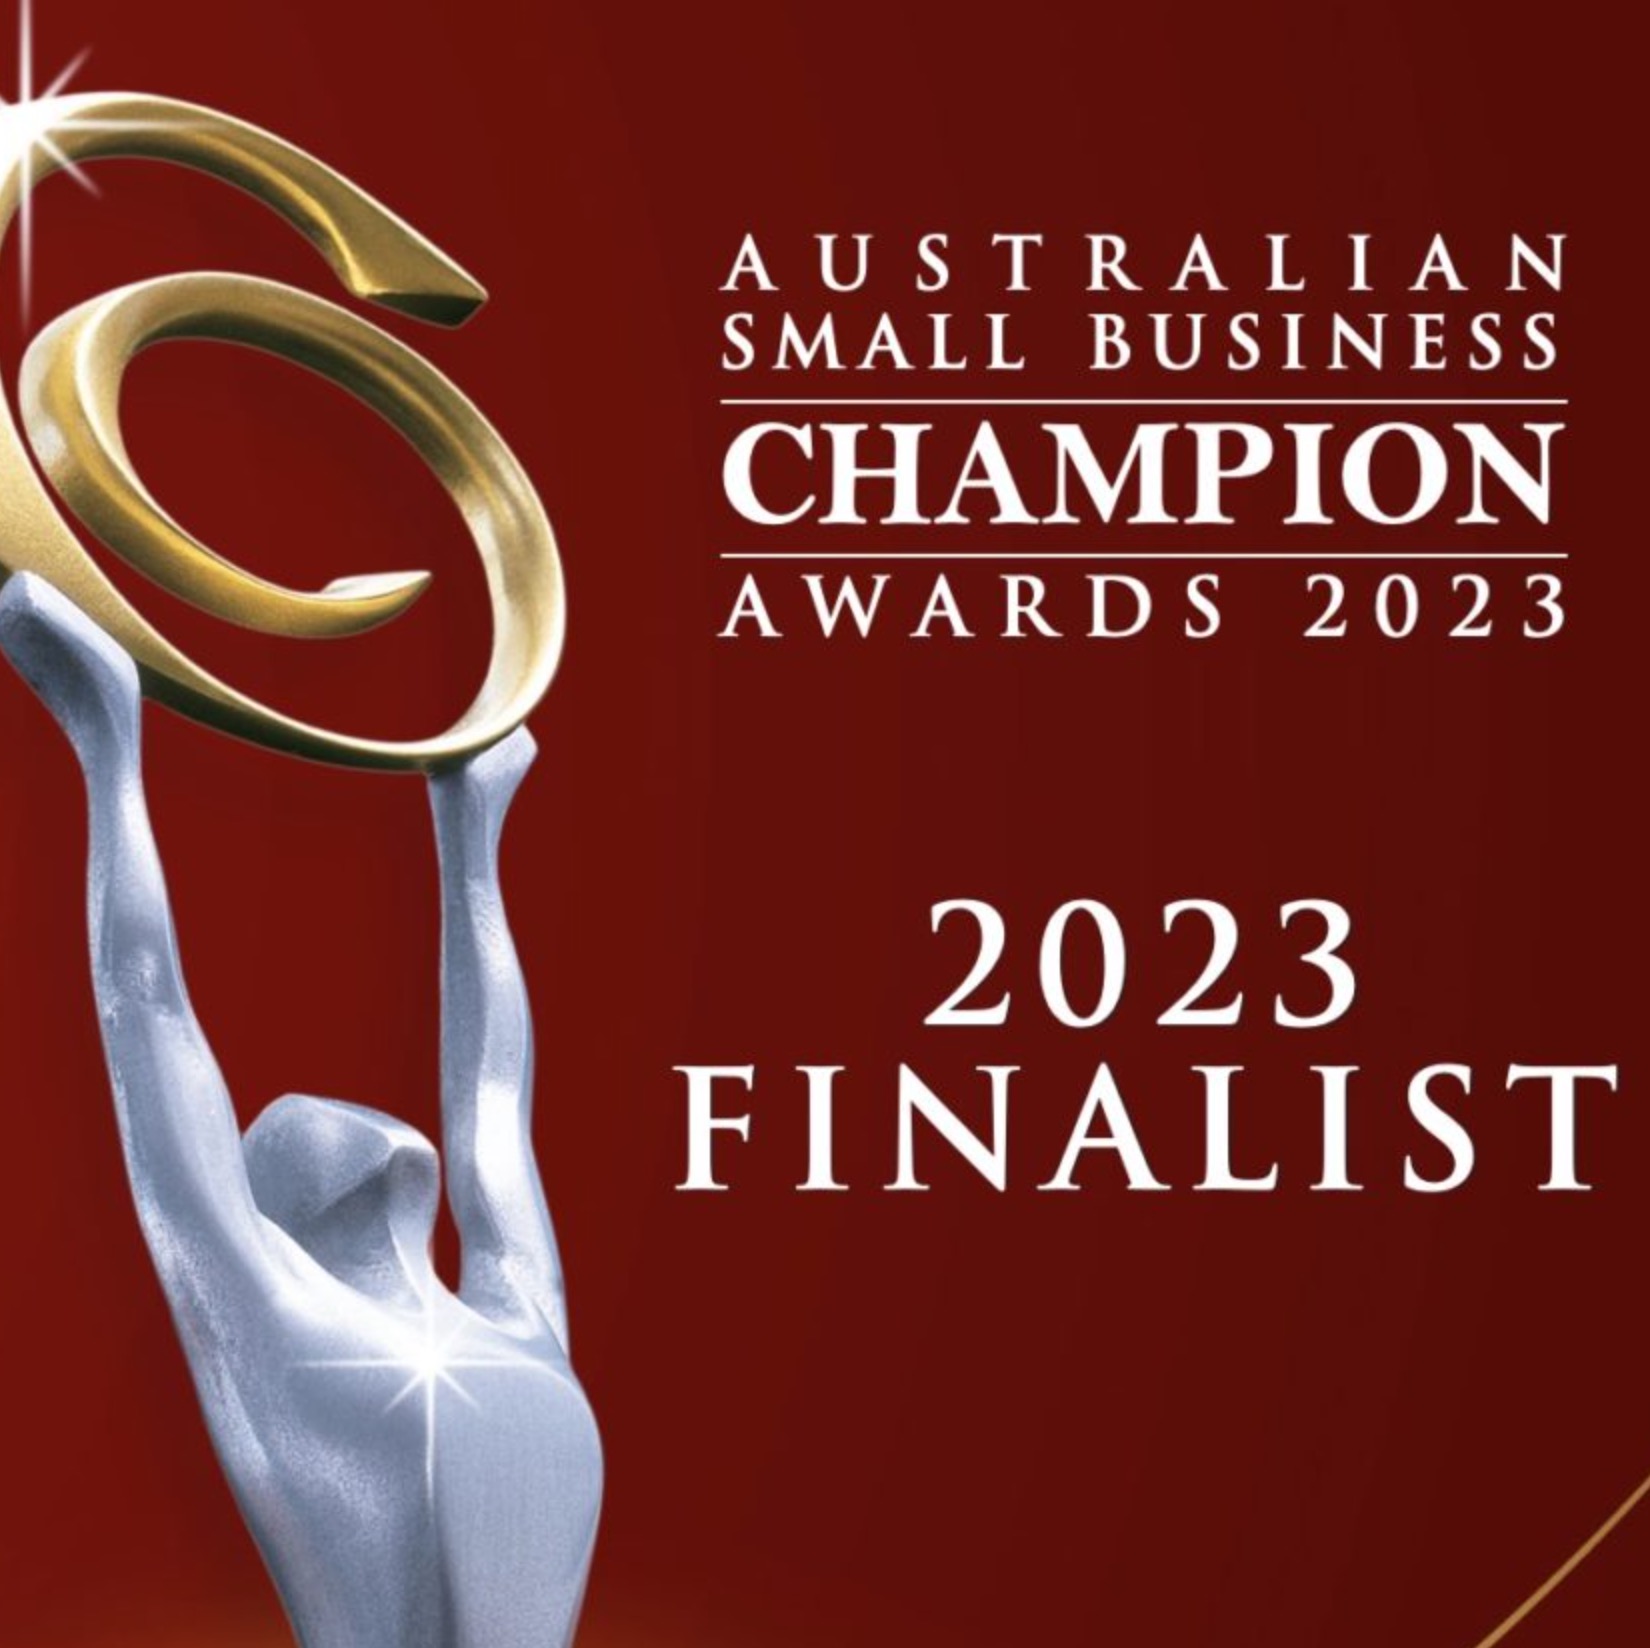 Orbe are Finalists for Hairdressing in the Australian Small Business Champion Awards 2023